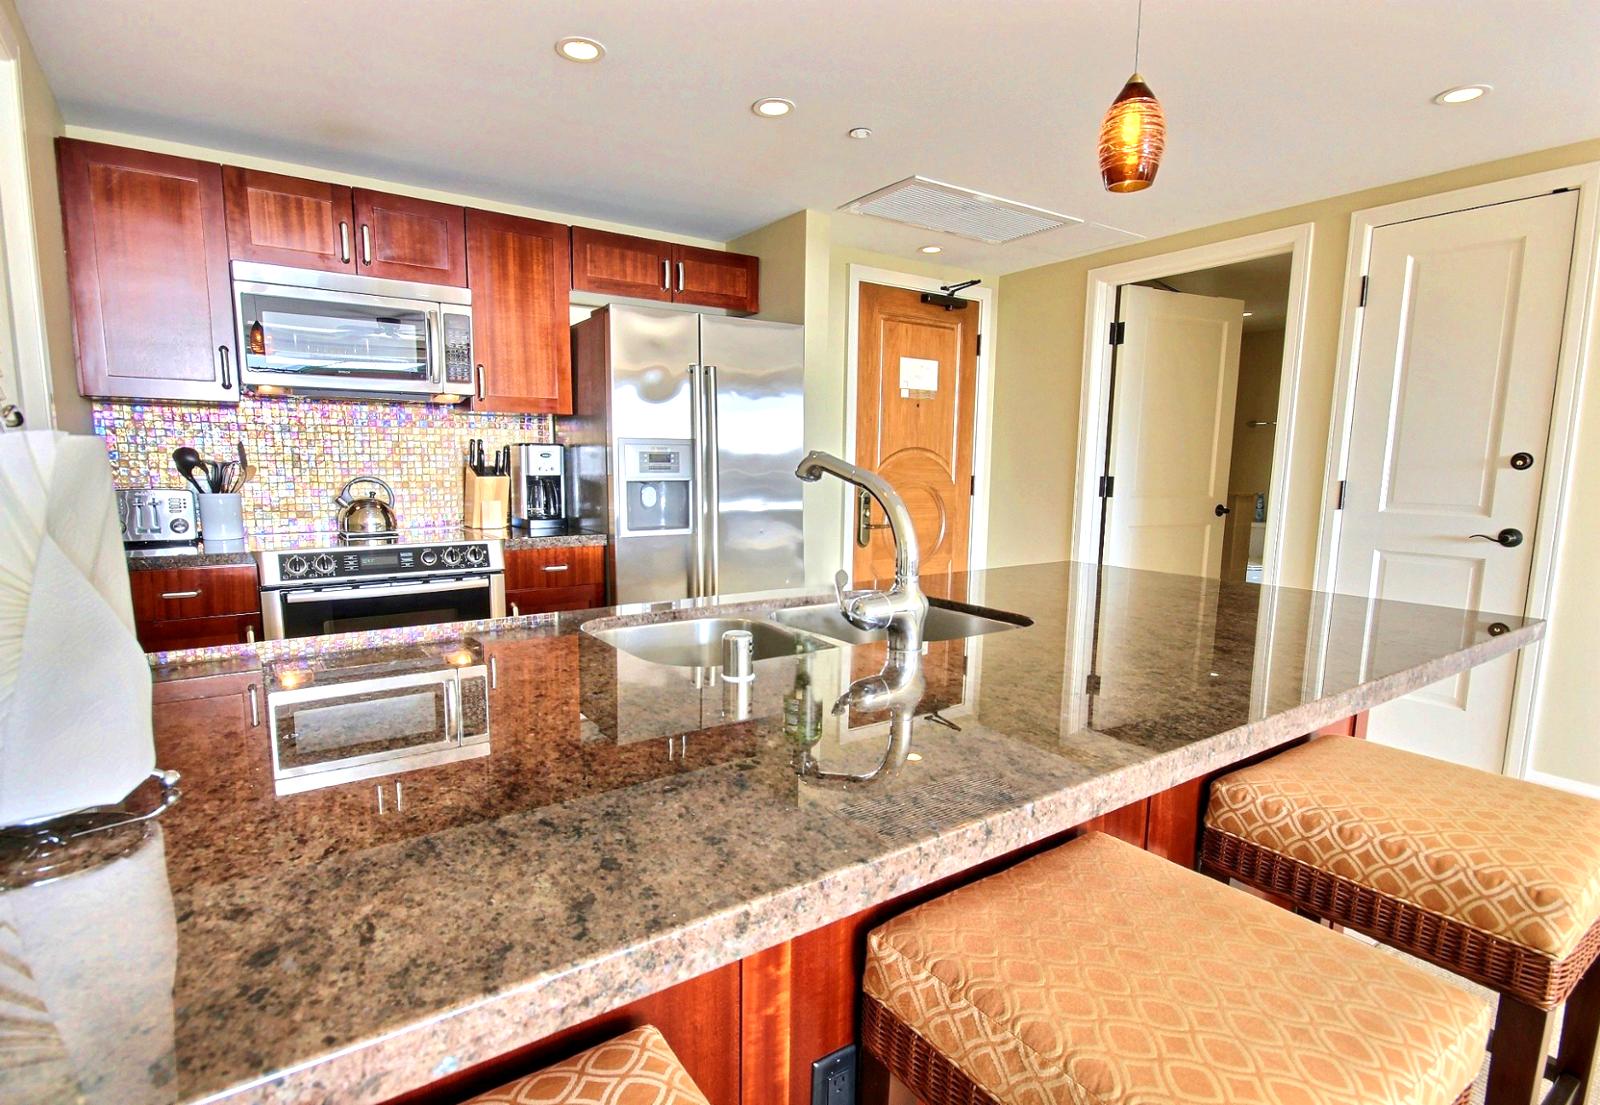 Large granite kitchen counters with bar stools for that casual meal or frozen libation. 